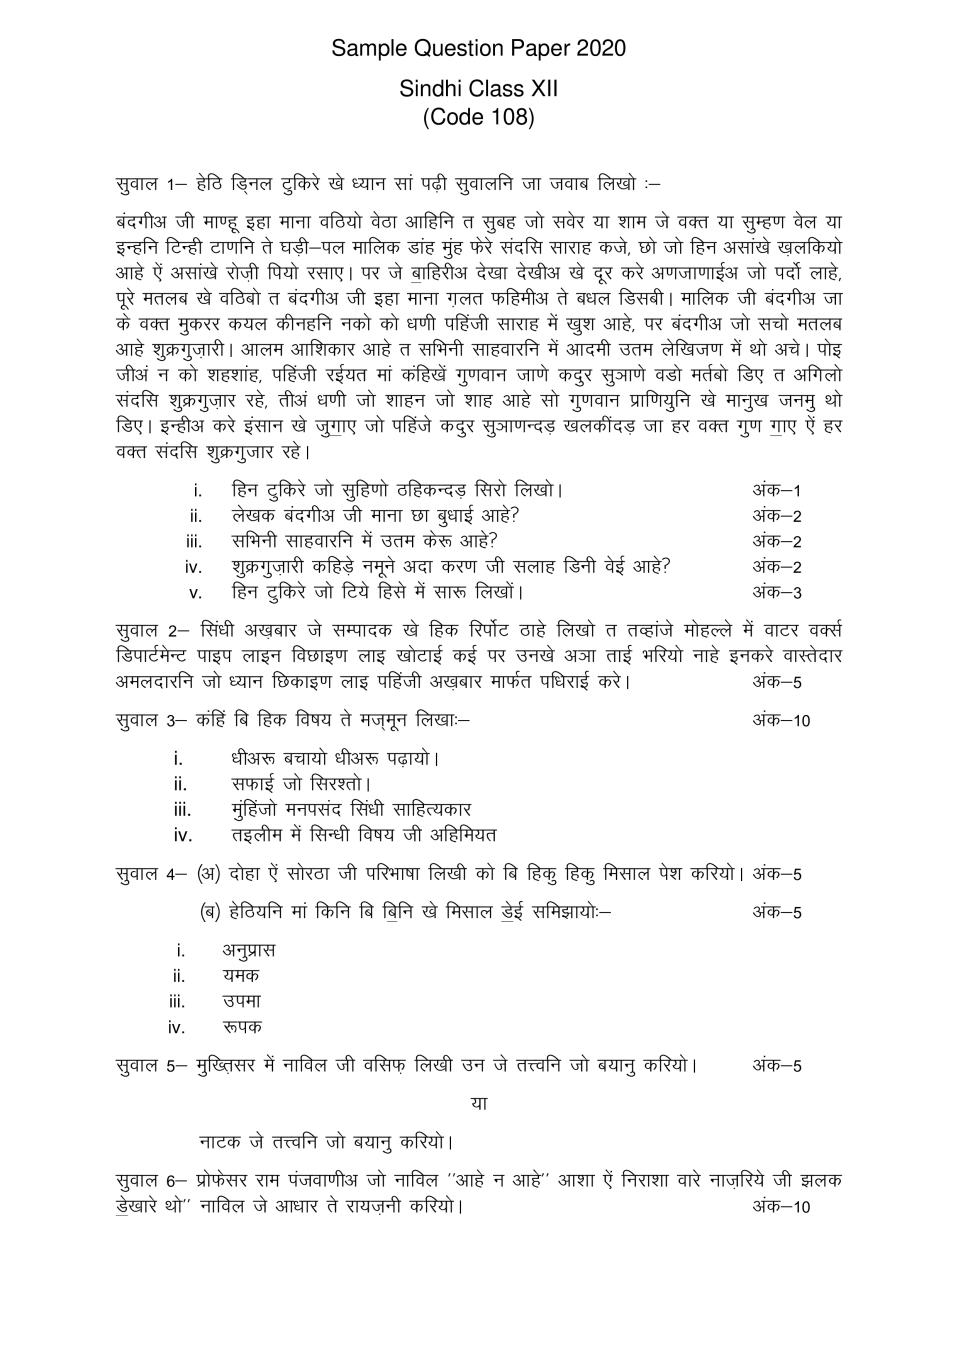 CBSE Class 12 Sample Paper 2020 for Sindhi - Page 1